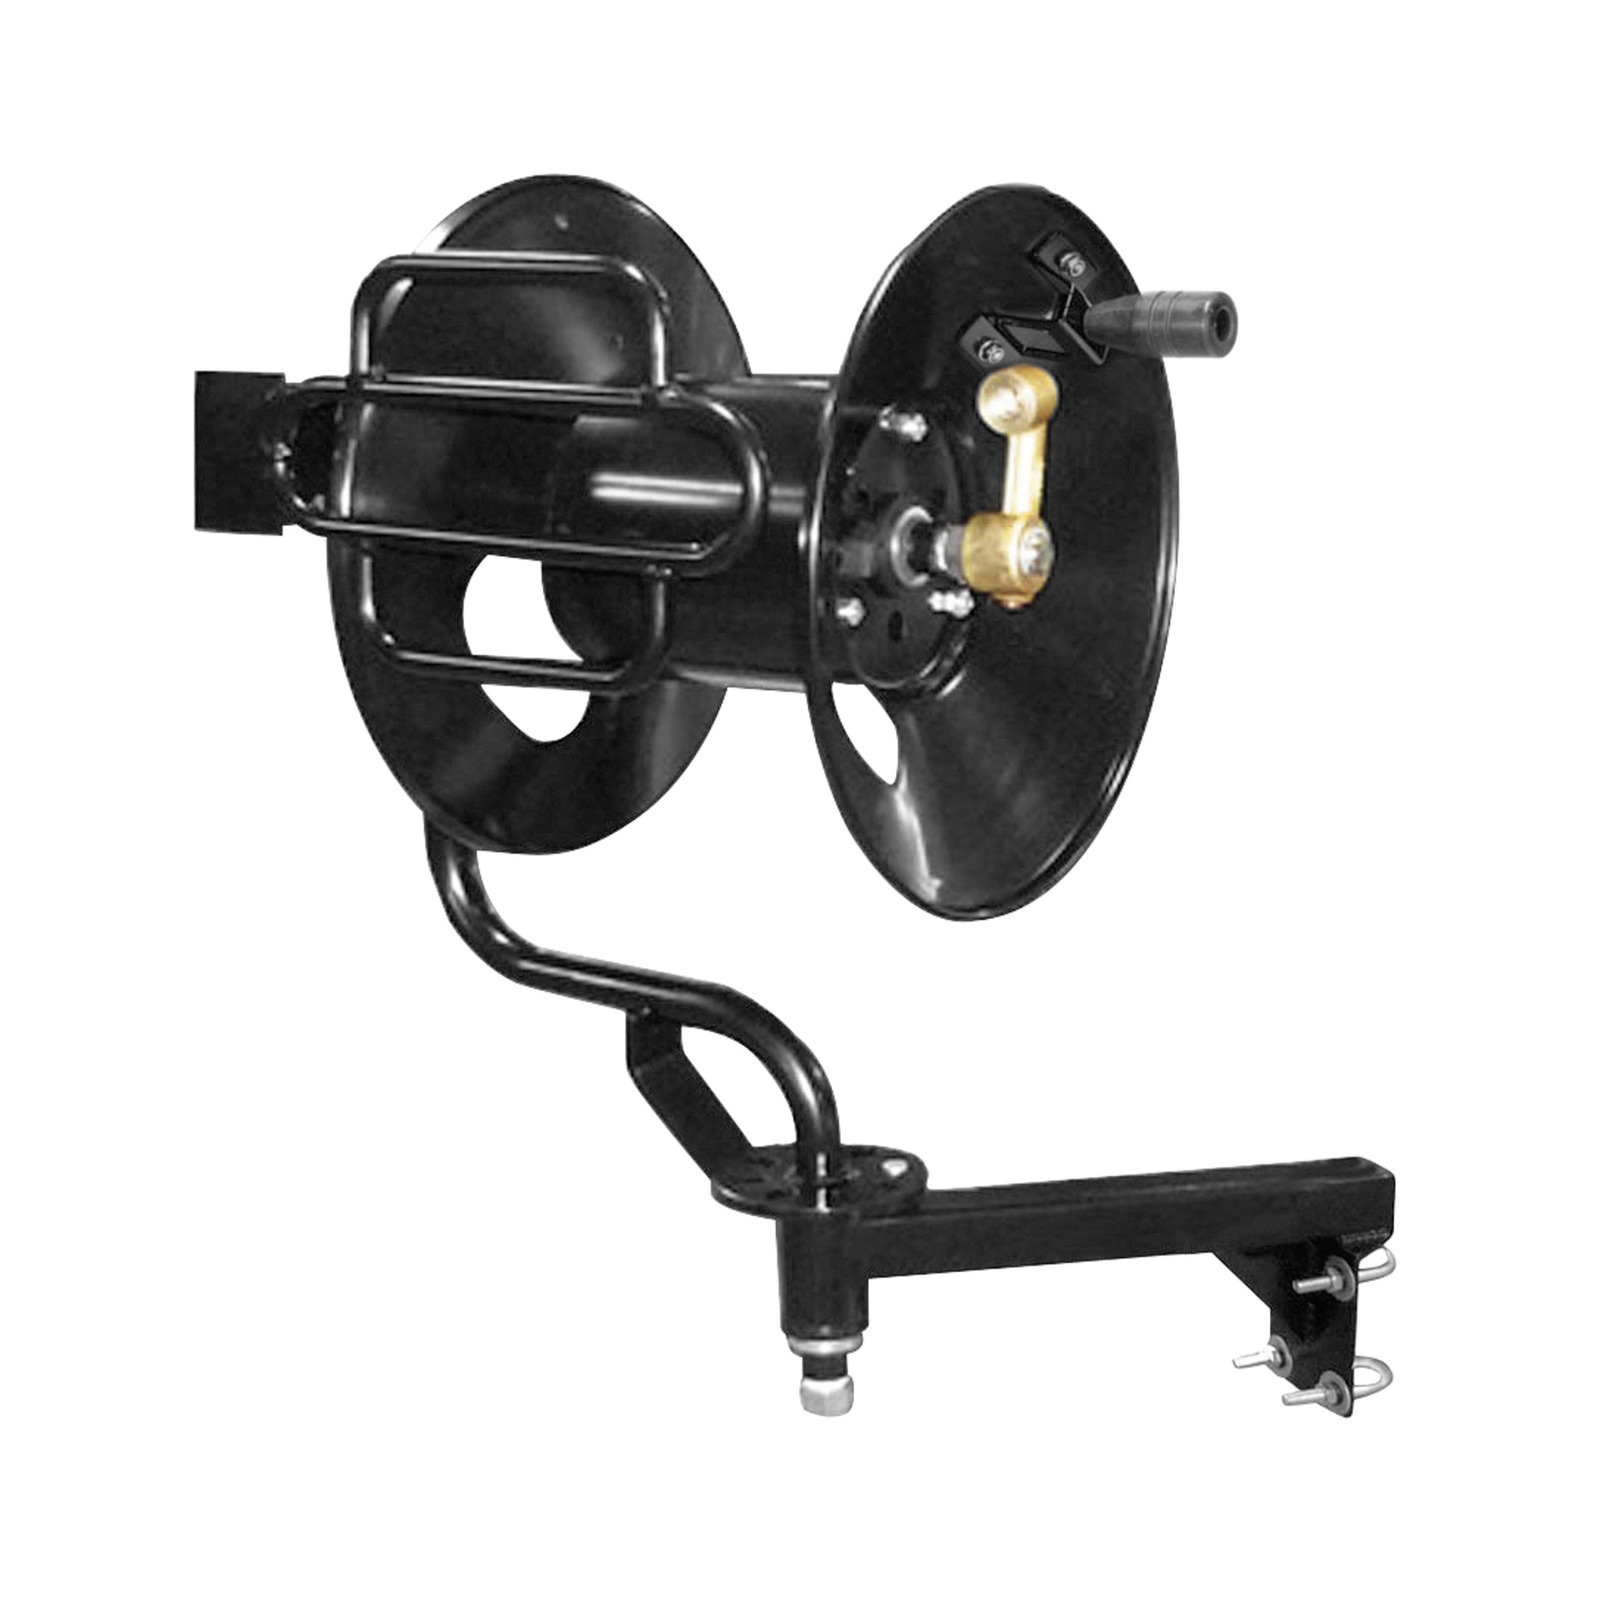 Hose Reel Swivels products for sale